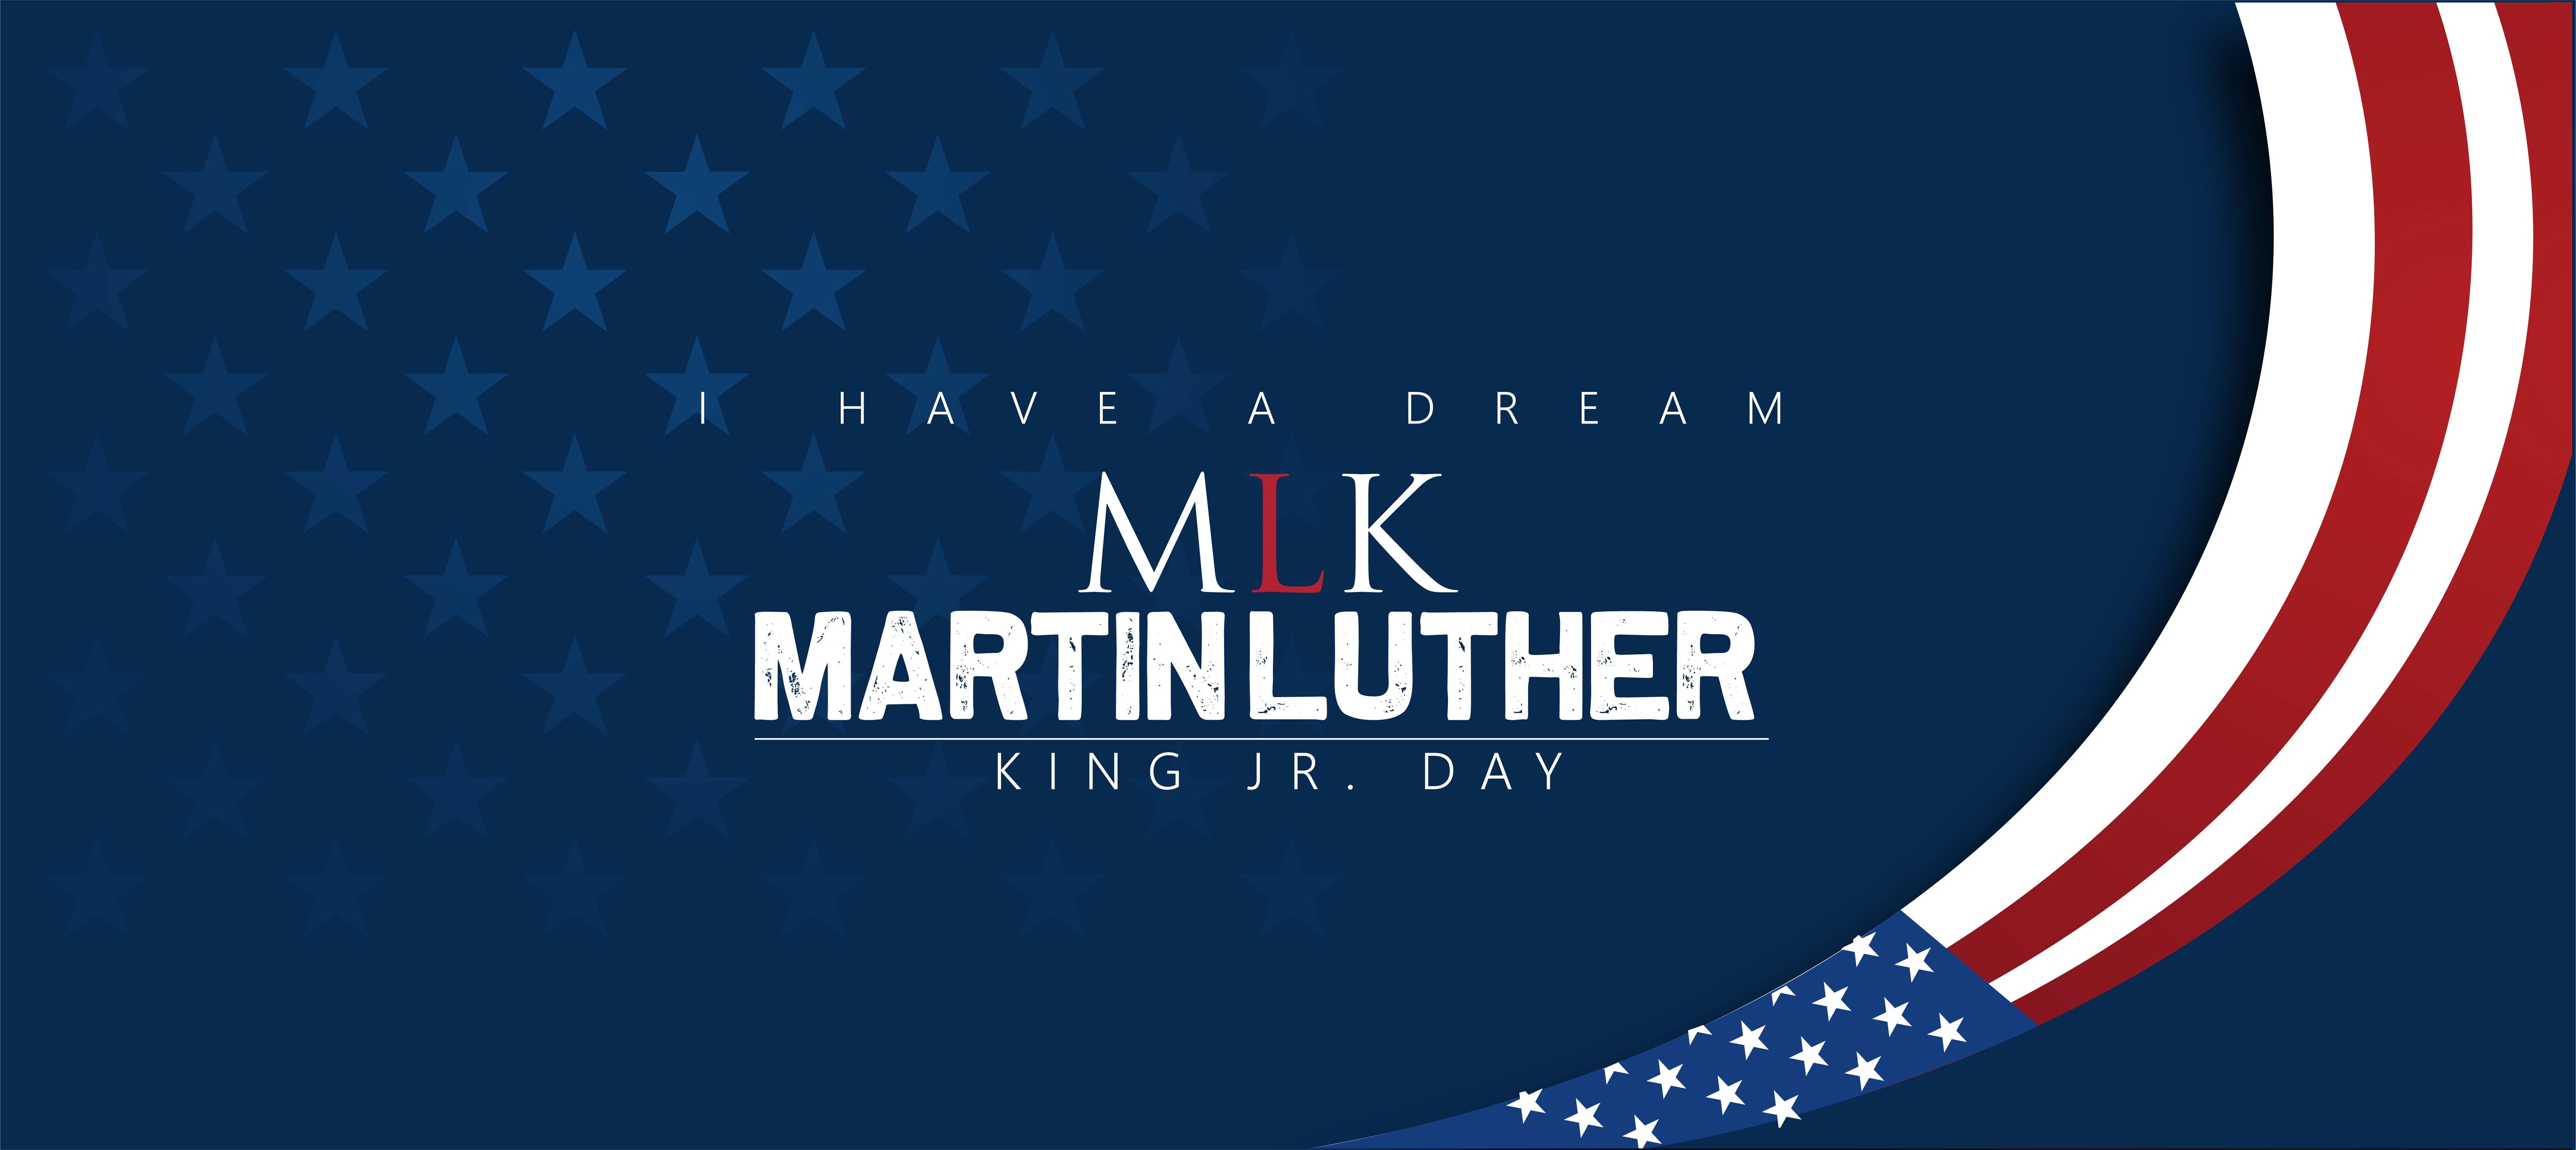 Quad Cities offices to close Monday in observance of Martin Luther King Jr. Day | The Daily Courier